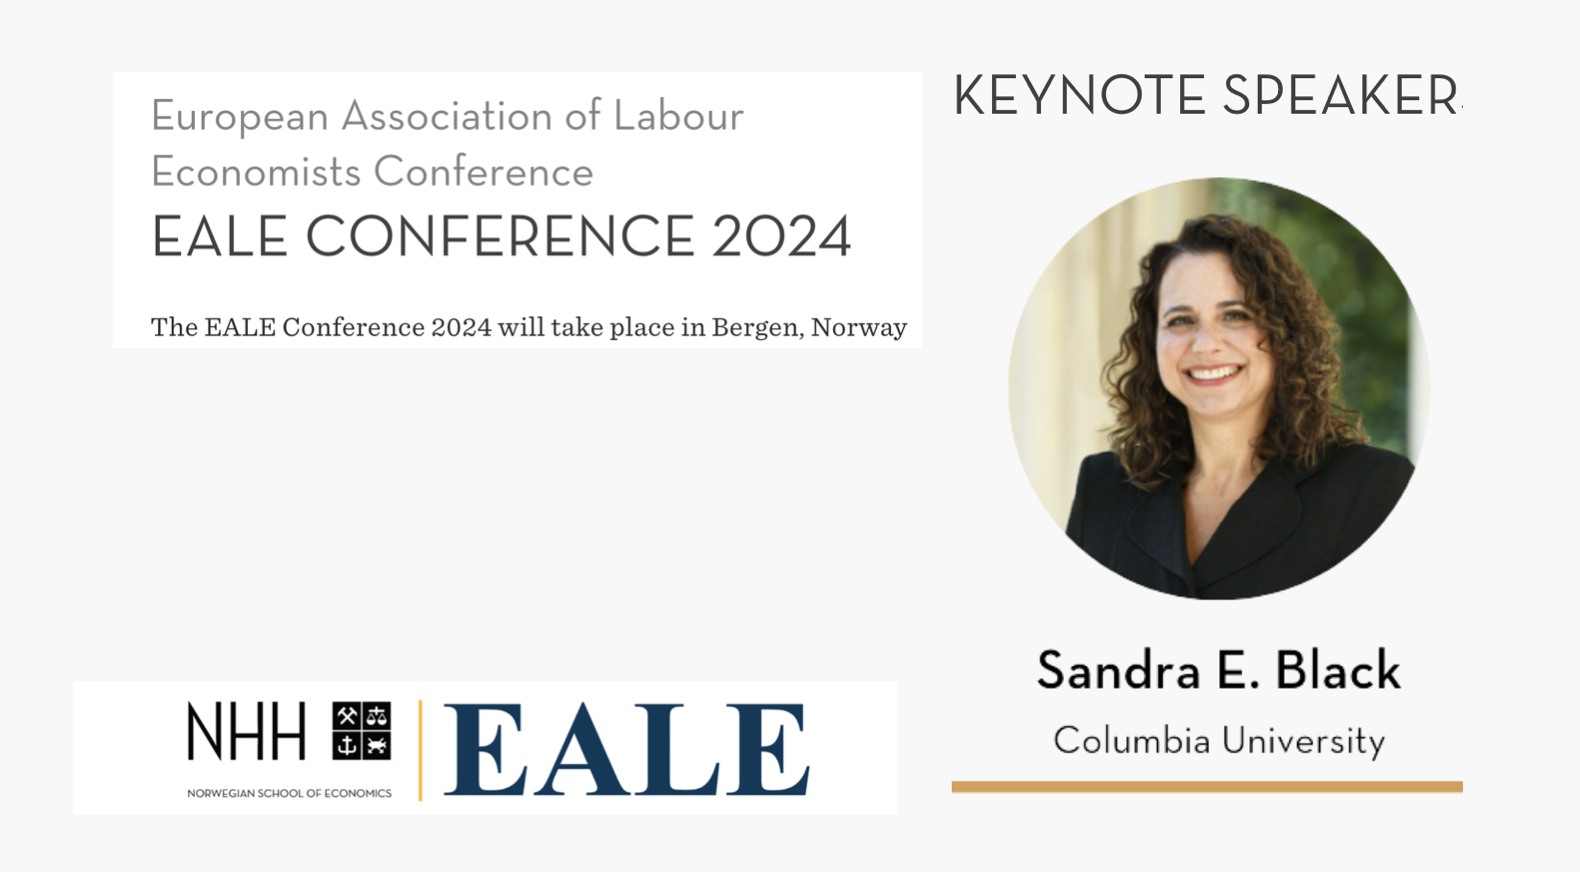 Sandra E. Black has been named as a keynote speaker for the 2024 European Association of Labour Economists (EALE) Conference